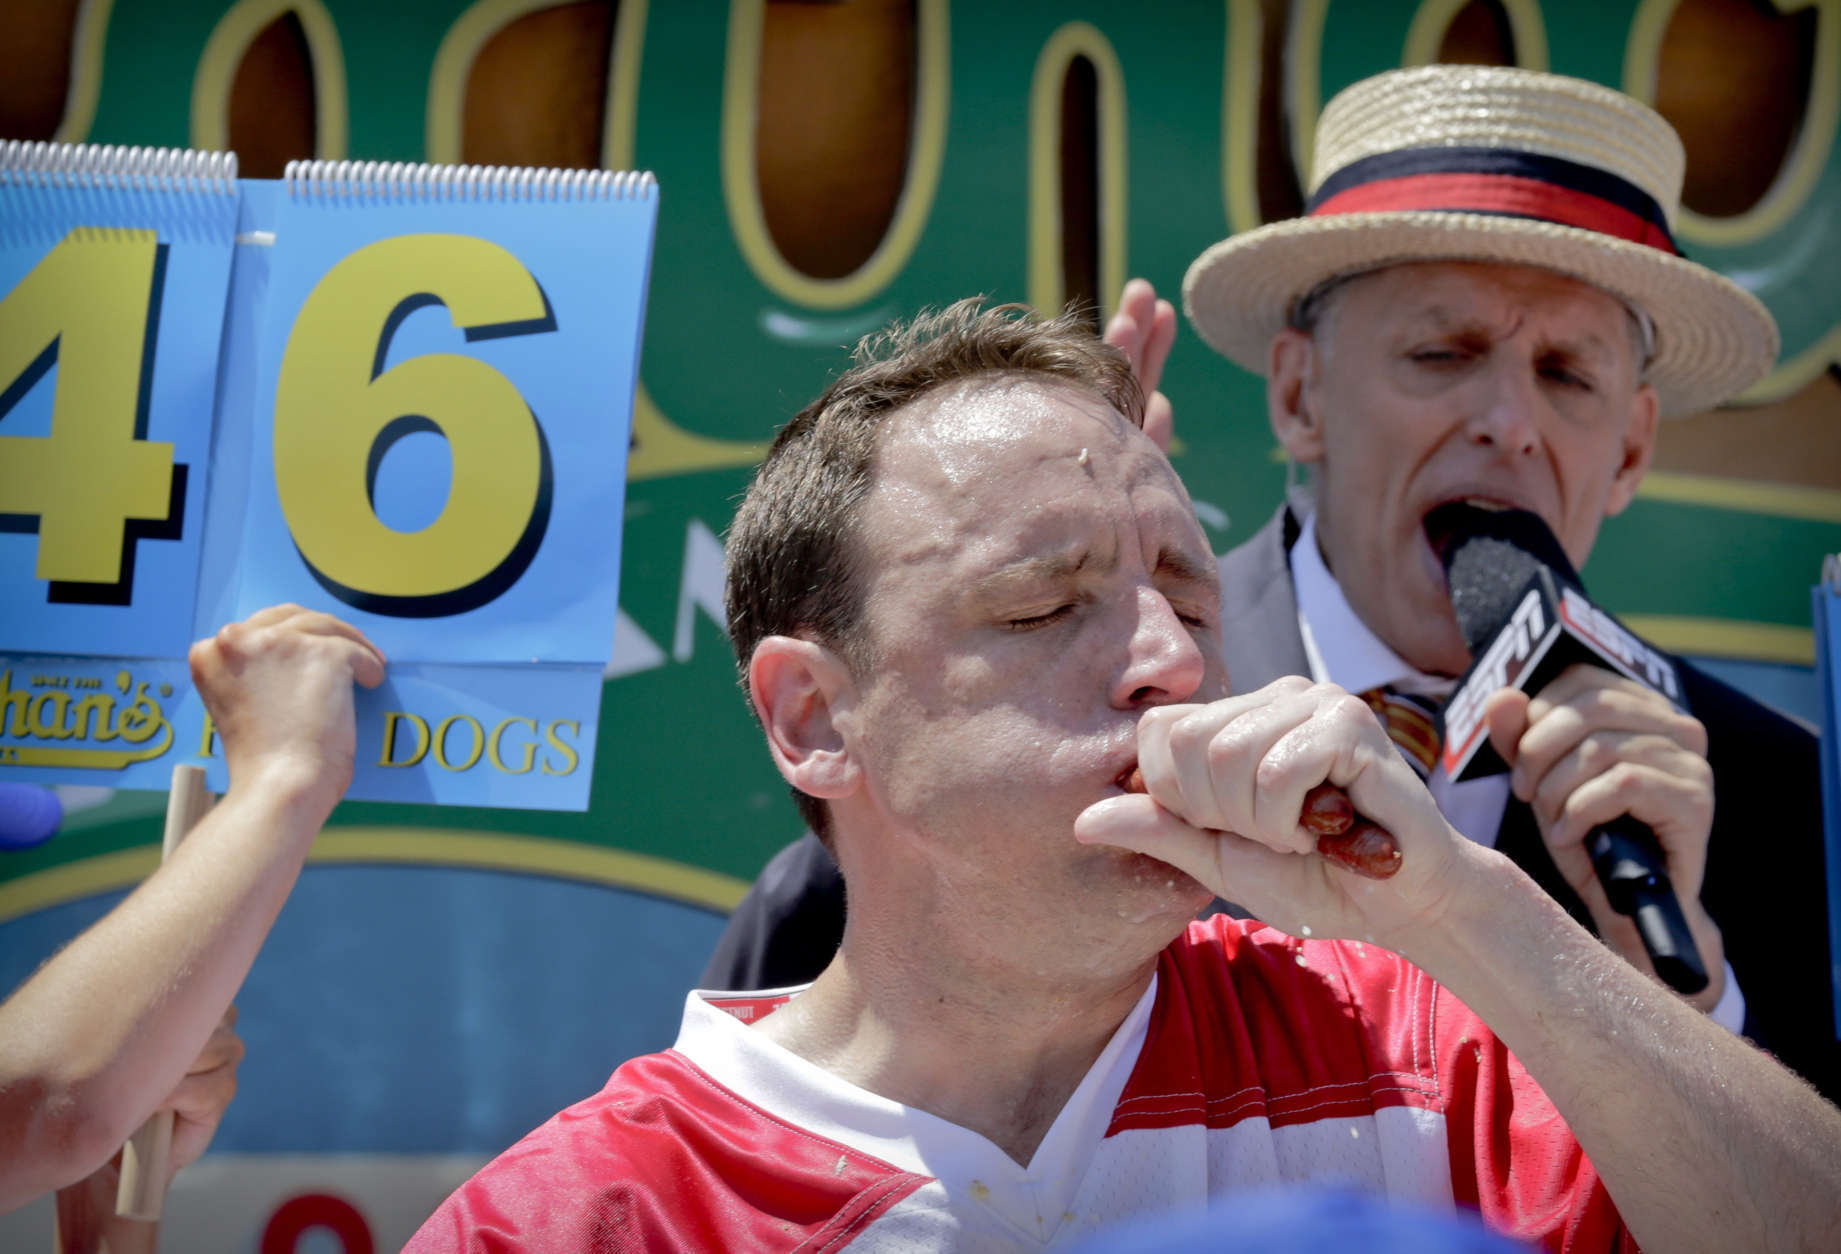 Joey Chestnut eats two hot dogs at a time during the Nathan's Annual Famous International Hot Dog Eating Contest, Tuesday July 4, 2017, in New York. Chestnut won, marking his 10th victory in the event. (AP Photo/Bebeto Matthews)